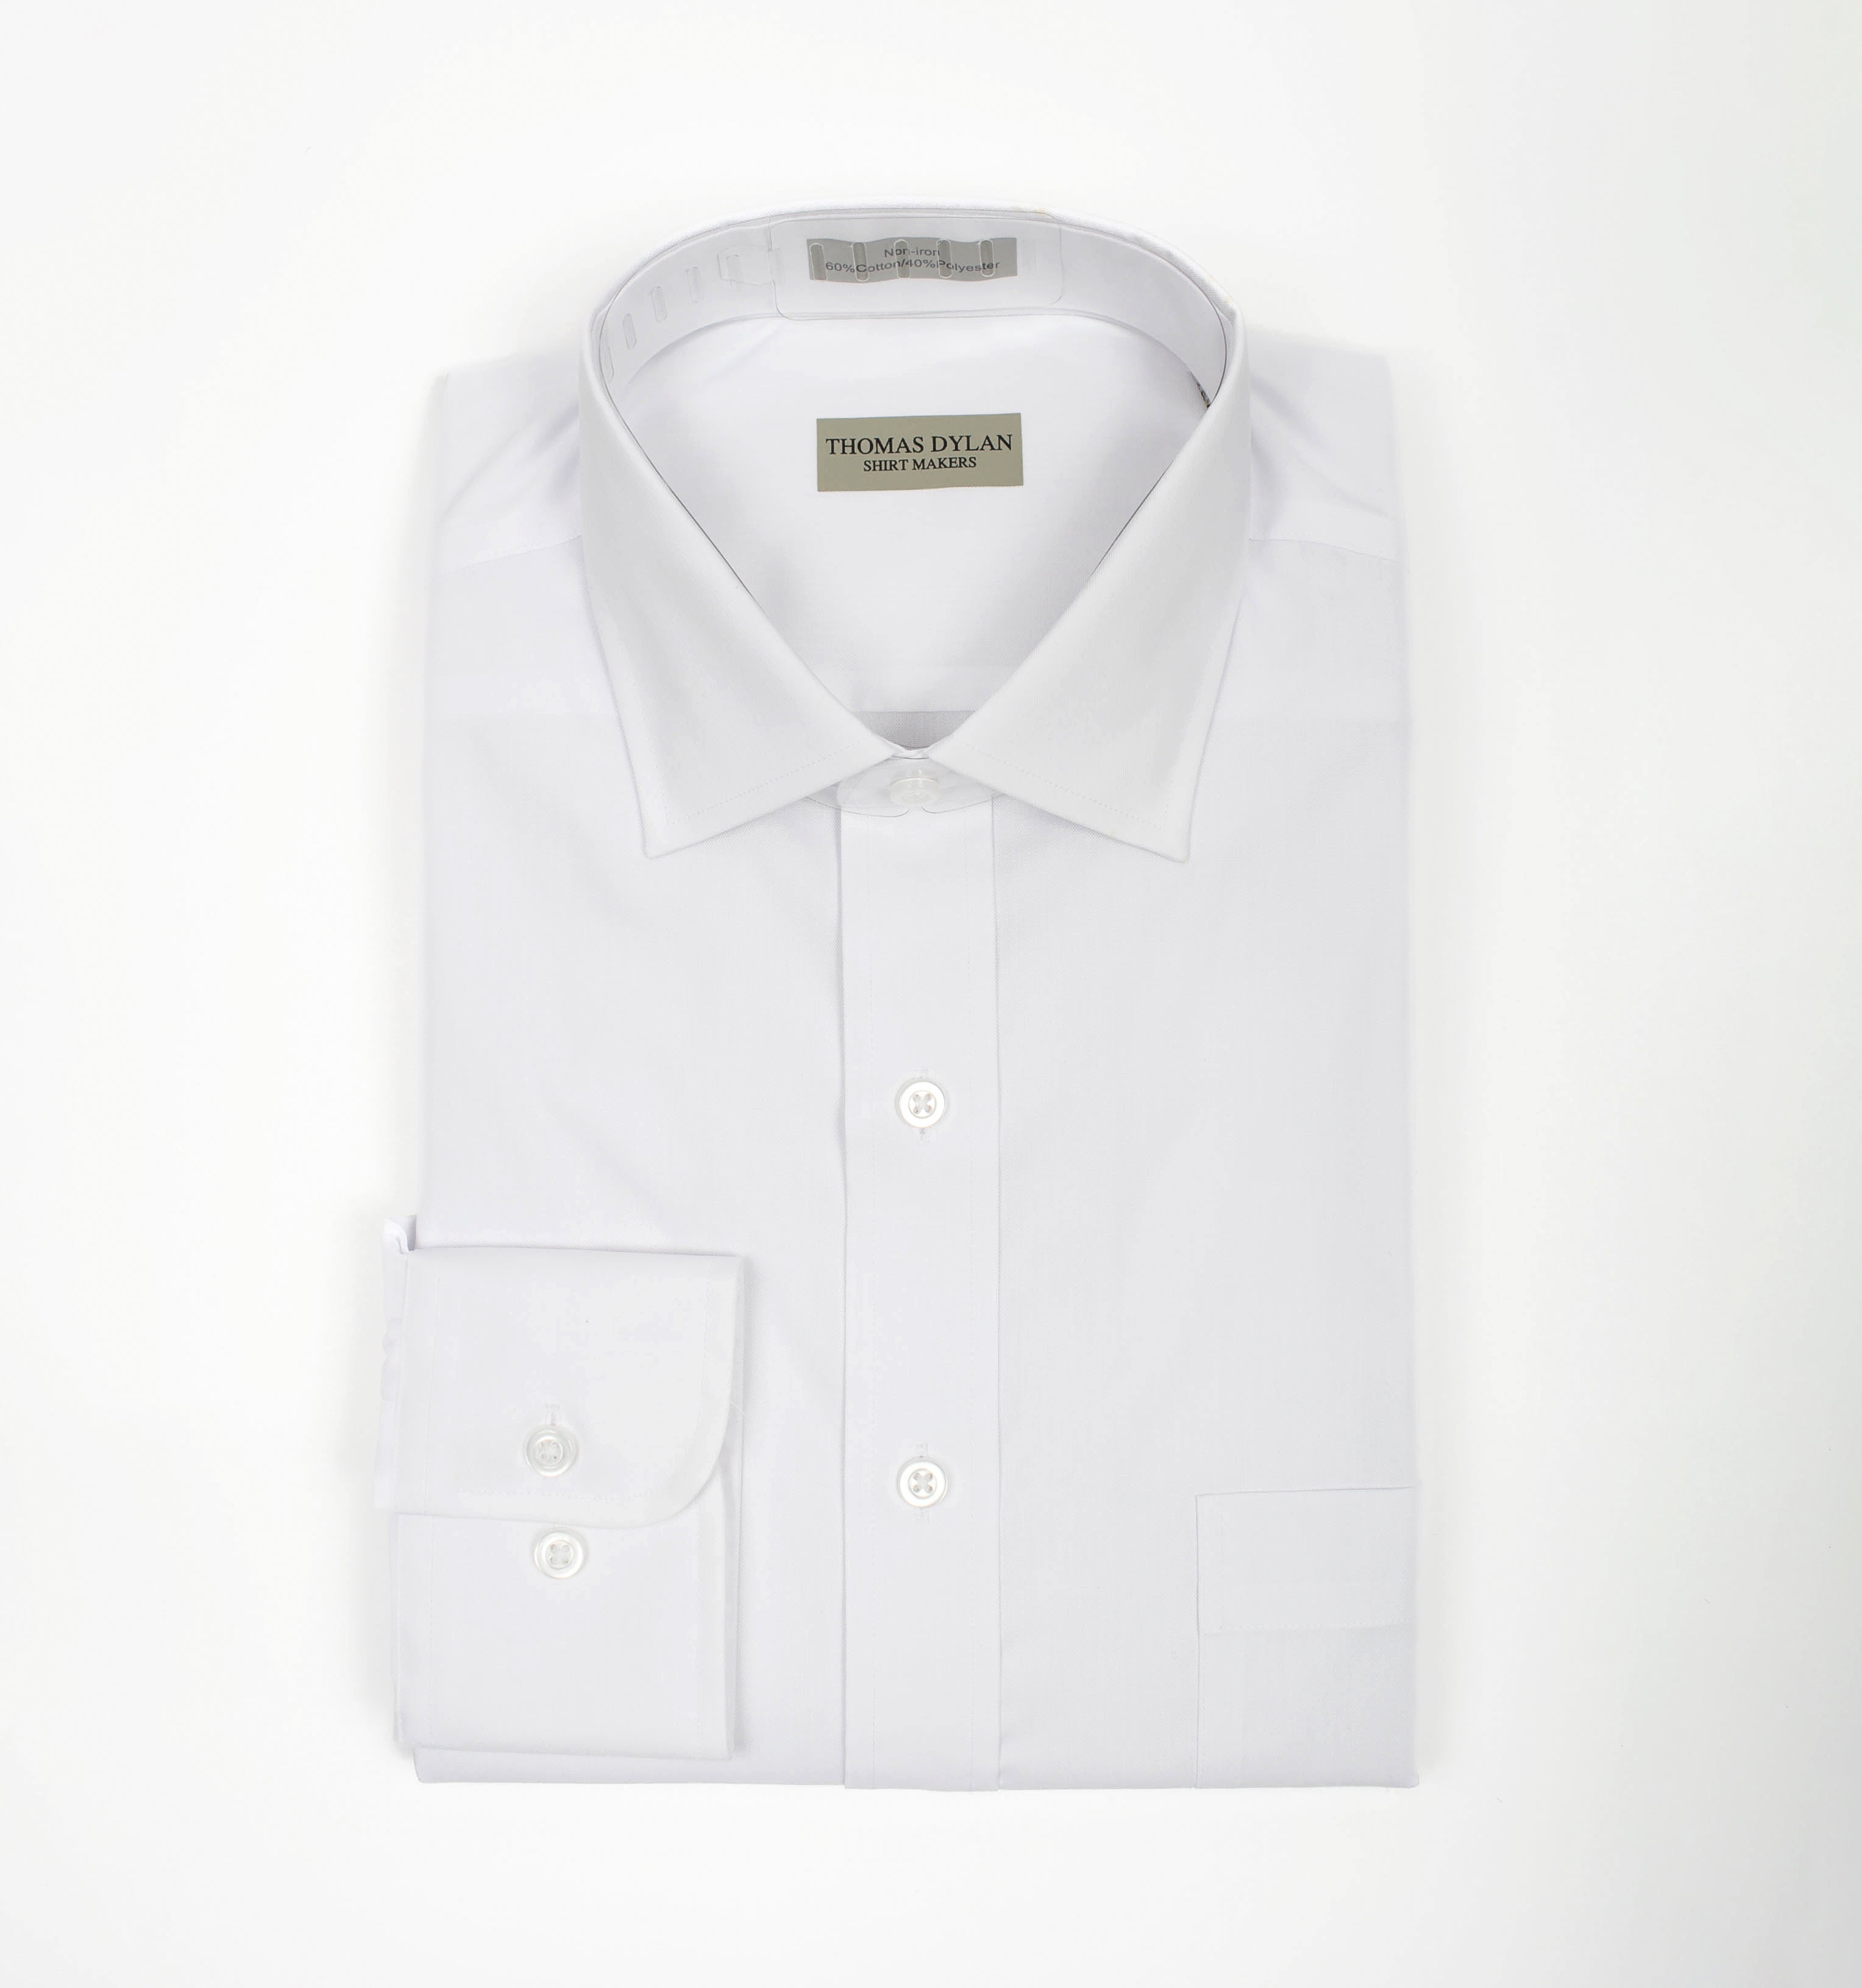 130 TF SC - Thomas Dylan White Tailored Fit Spread Collar